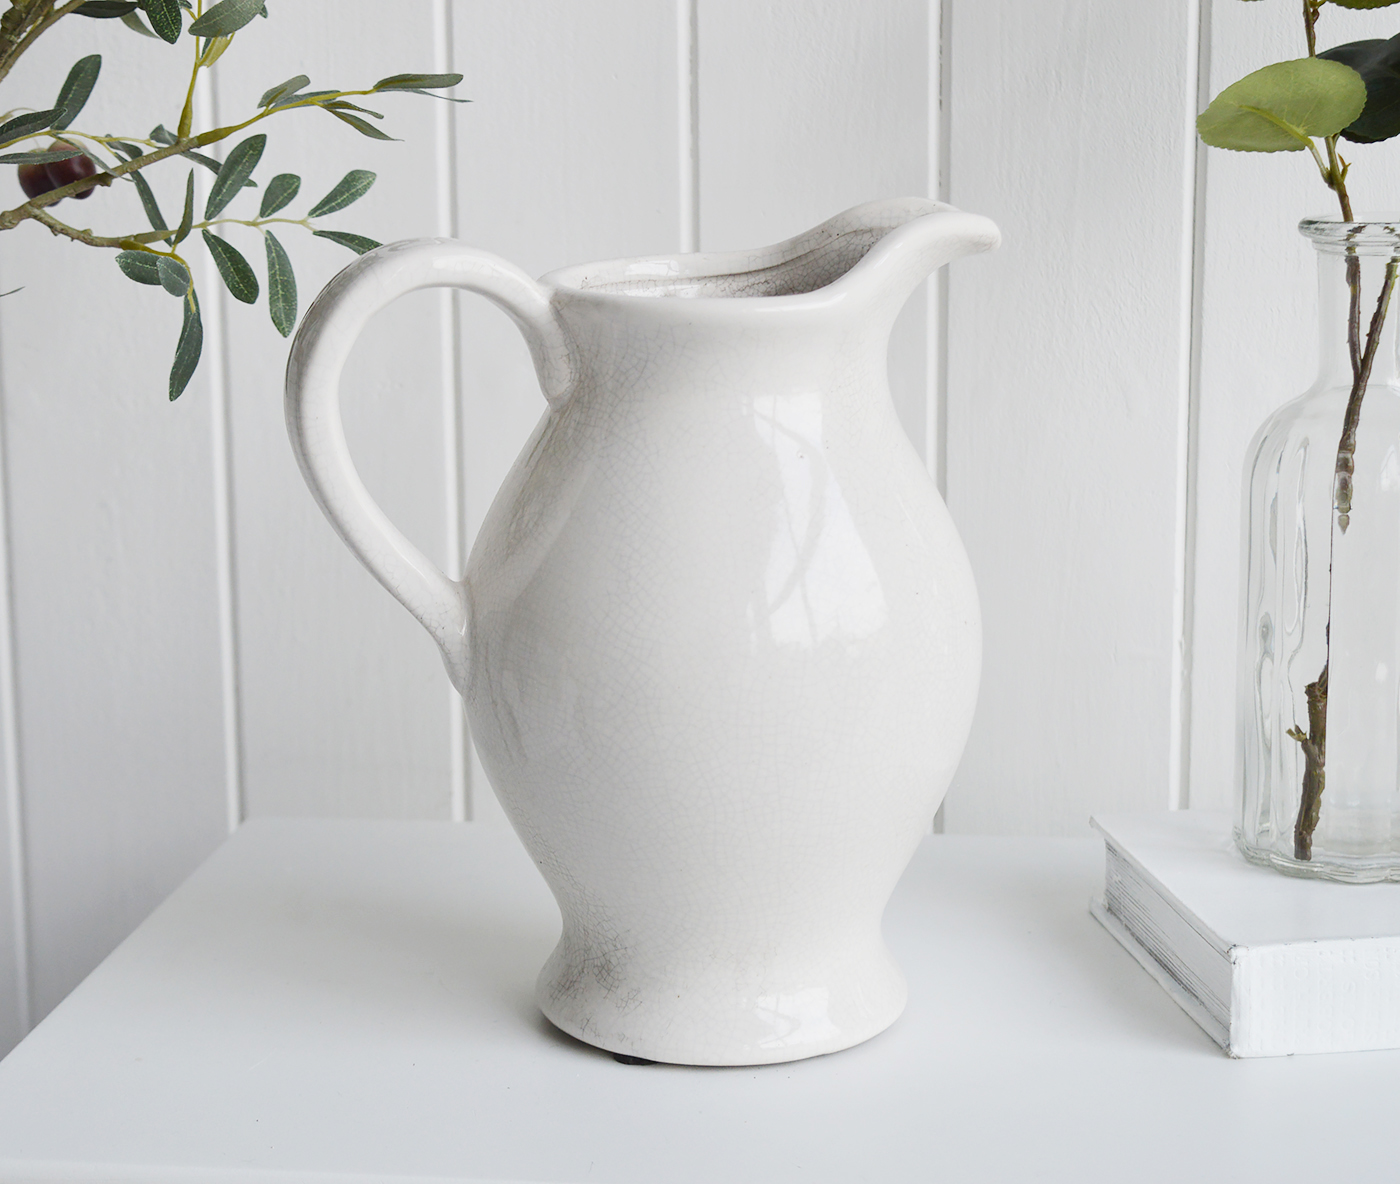 White Ceramic Jug / Vase -  New England style Country and Coastal Furniture and Interiors